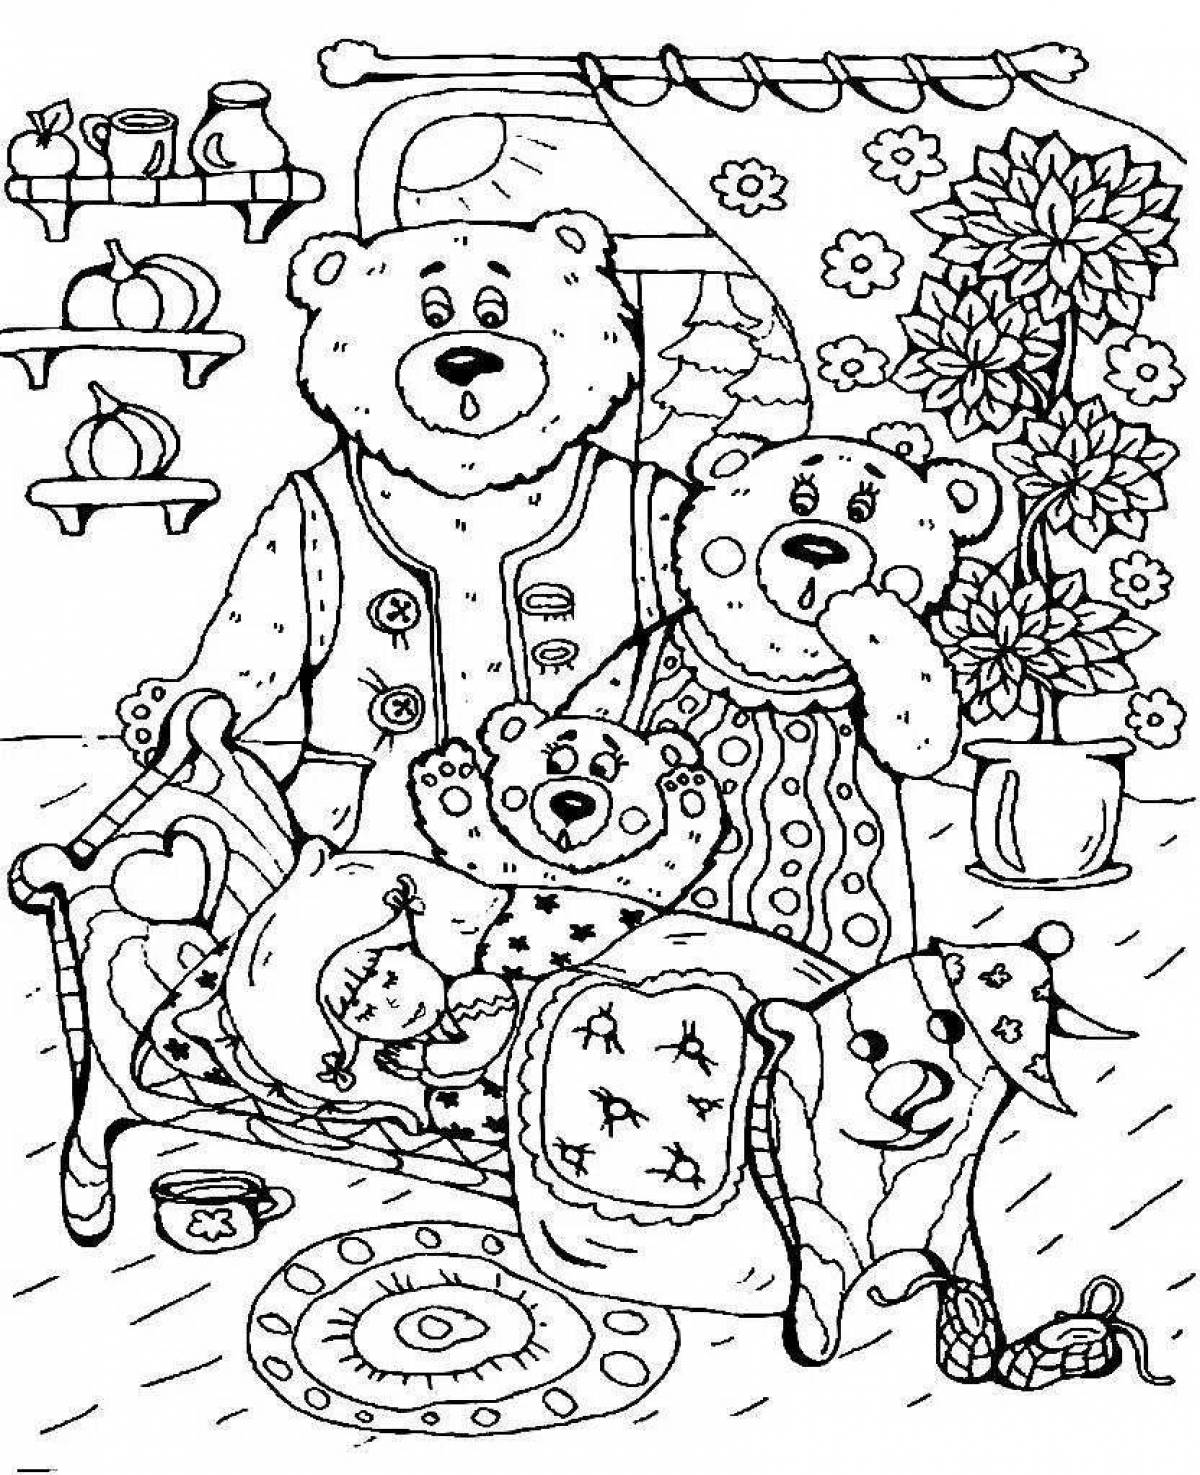 Fancy three bears coloring book for kids